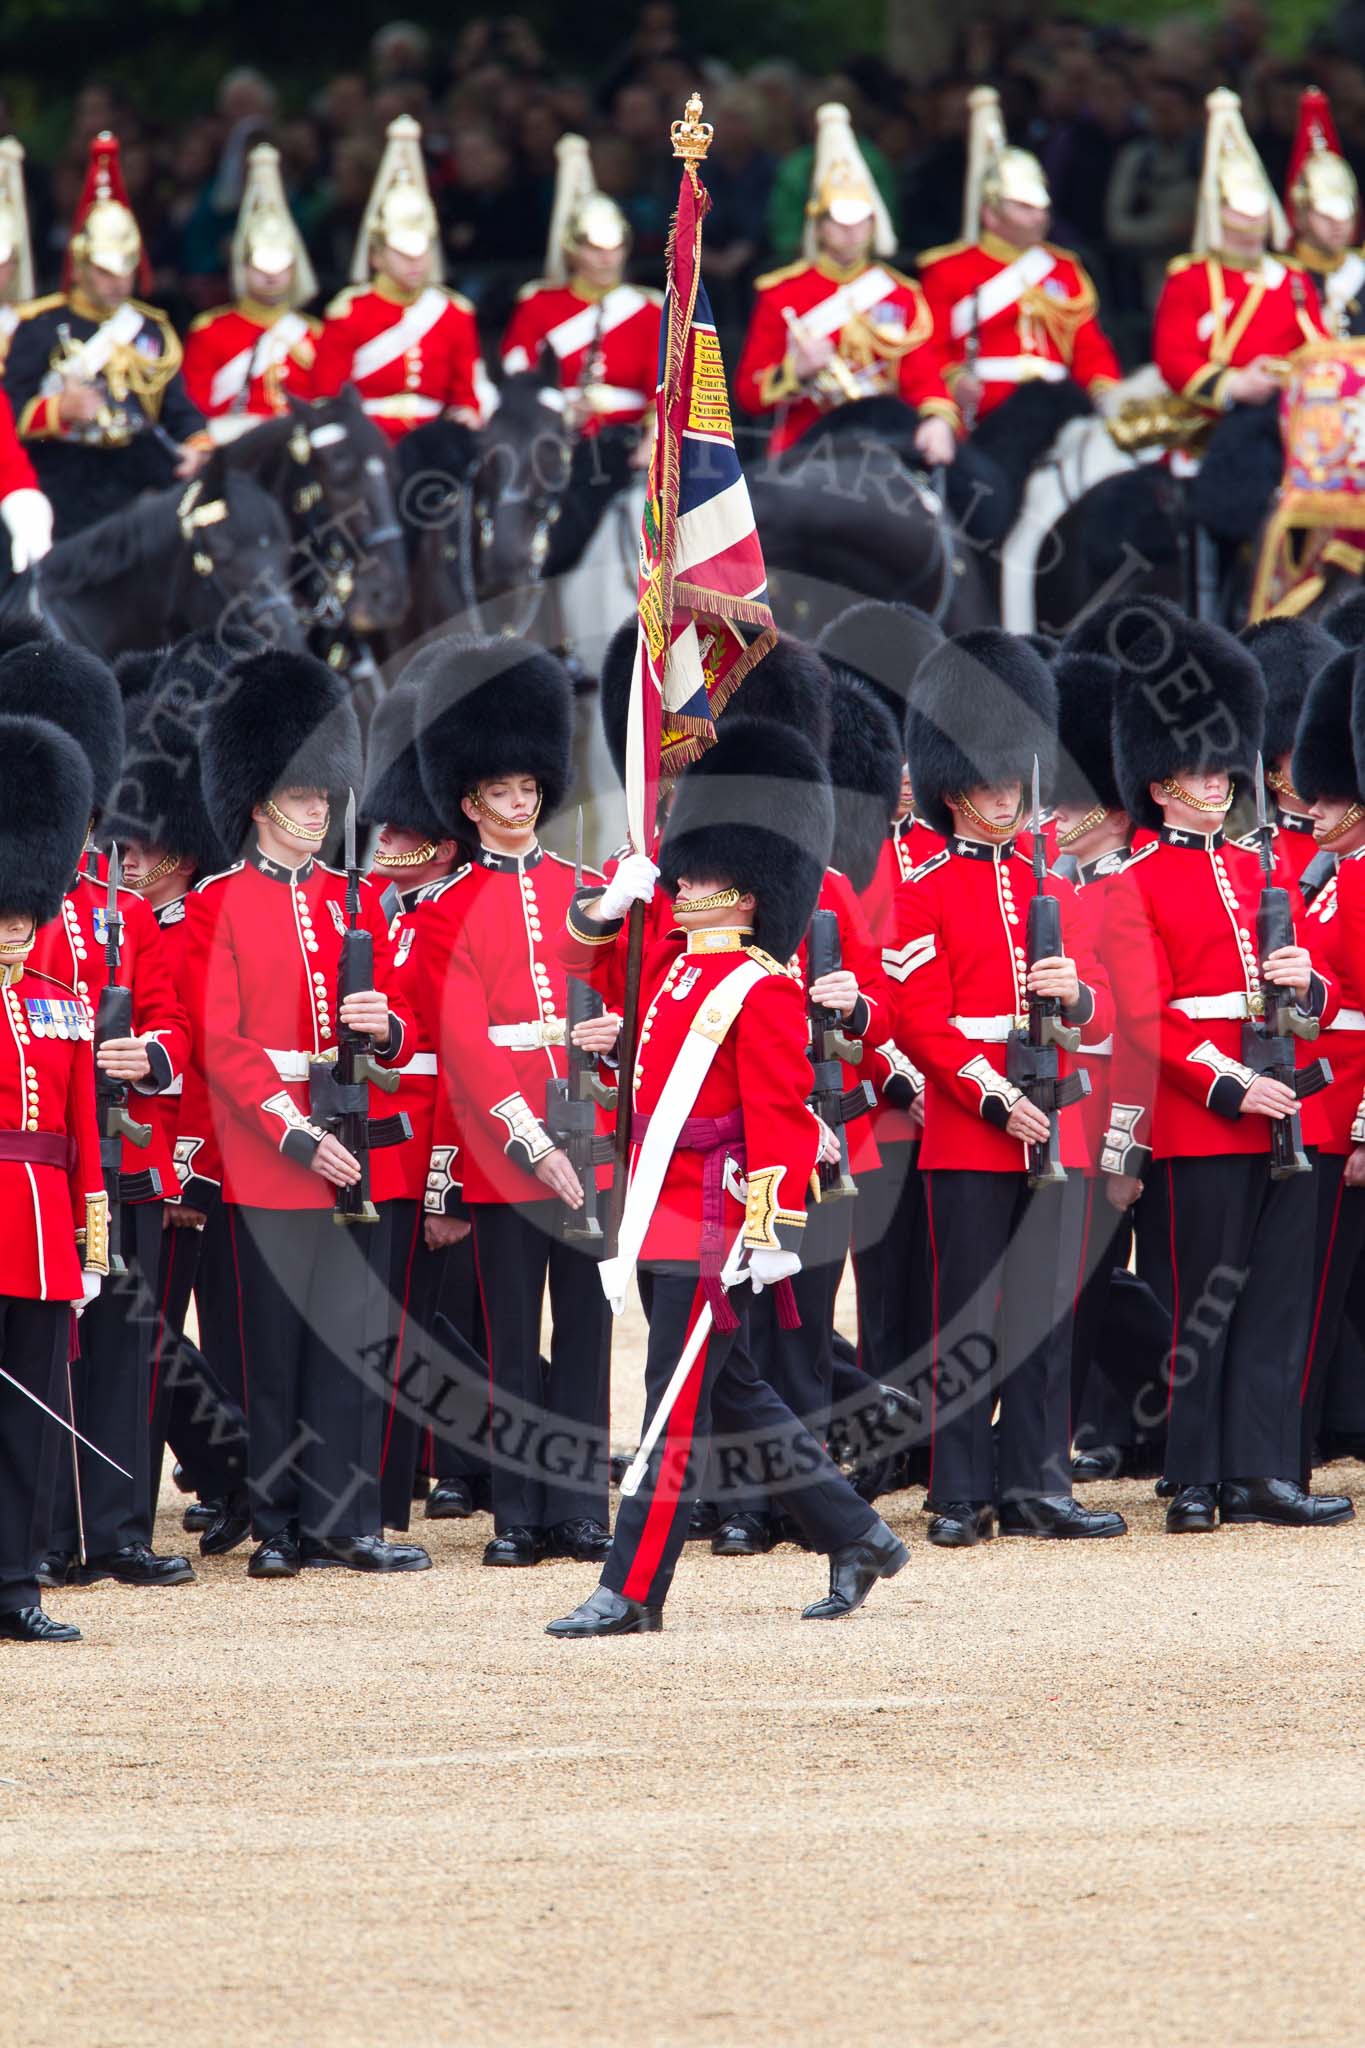 The Major General's Review 2011: The Ensign, Lieutenant Tom Ogilvy, trooping the Colour along No. 5 Guard, 1st Battalion Welsh Guards..
Horse Guards Parade, Westminster,
London SW1,
Greater London,
United Kingdom,
on 28 May 2011 at 11:25, image #174